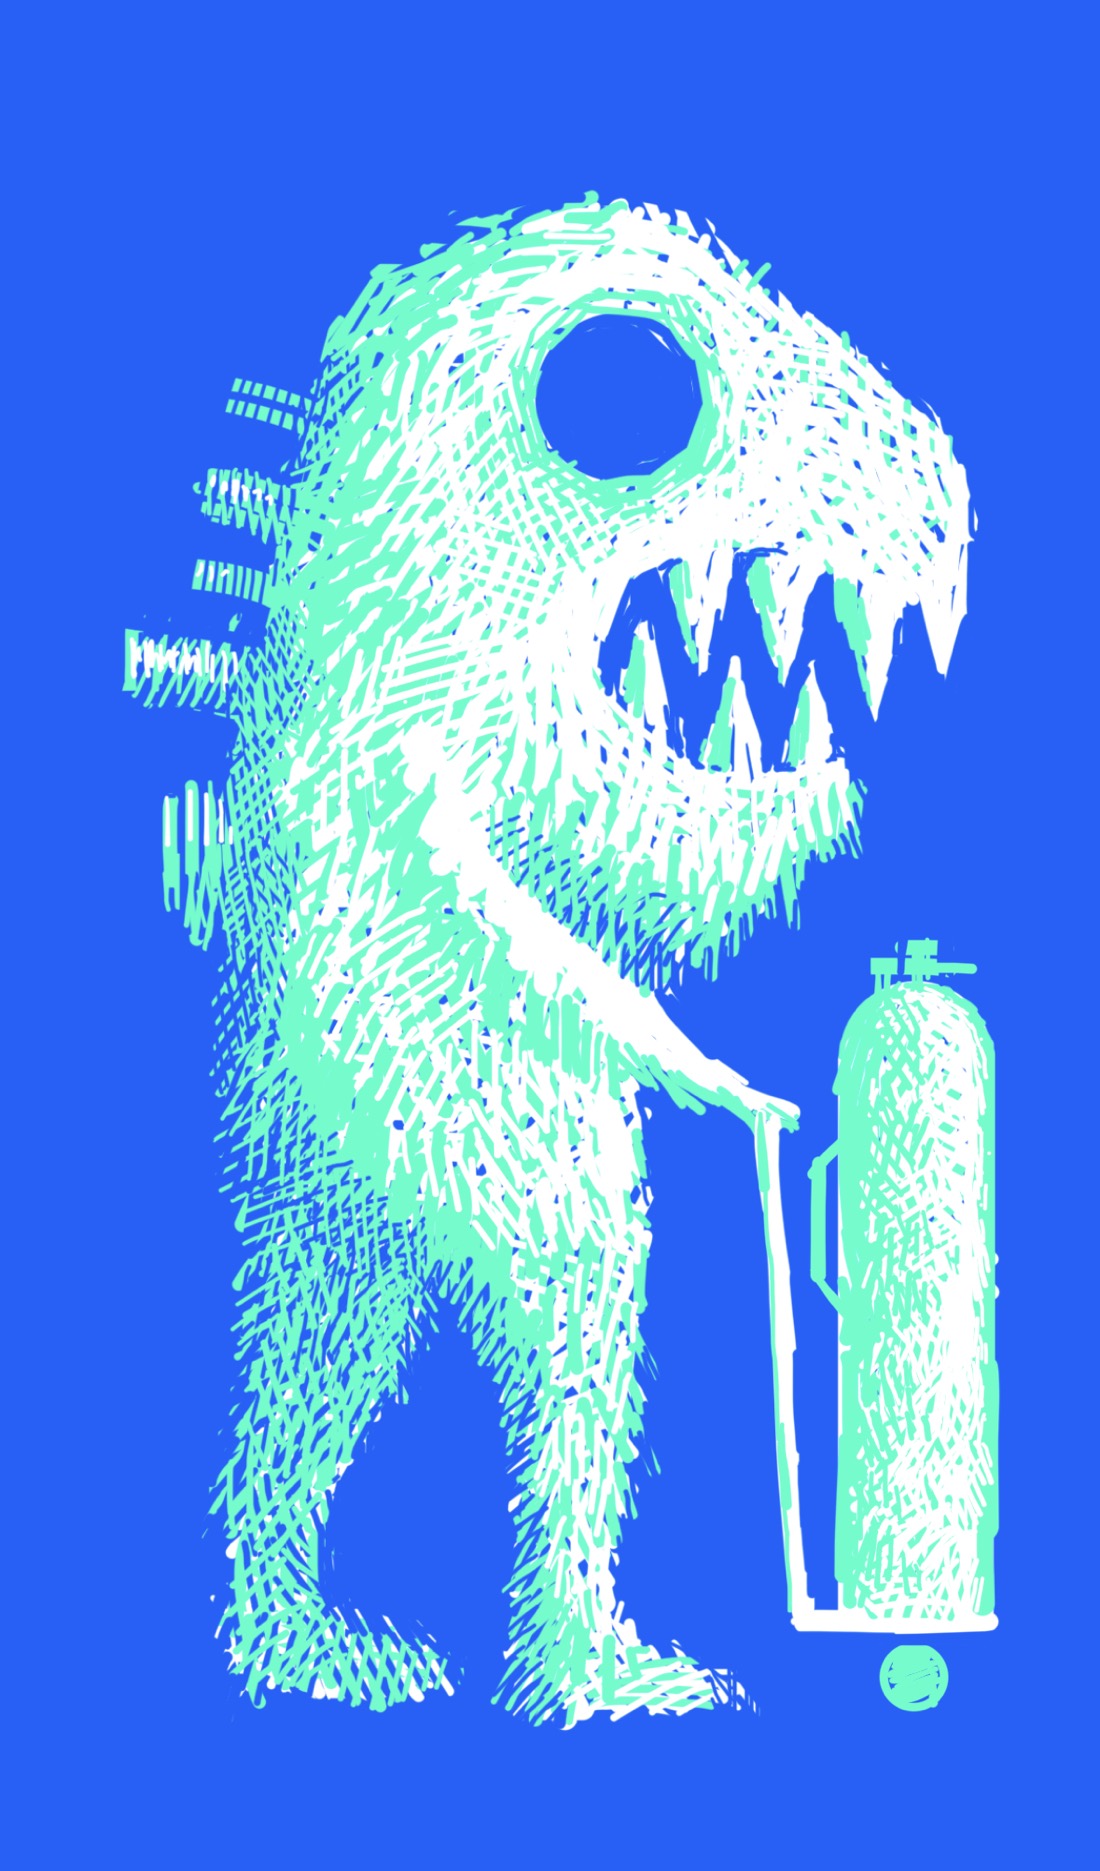 A furry creature with a large head, an empty eyesocket, and a giant, toothy mouth pushes a small cart on which is placed a tall, thin tank that looks kind of like a fire extinguisher or something containing a compressed gas. Protruding from the creature's back are several pipes and tubes of varying size.